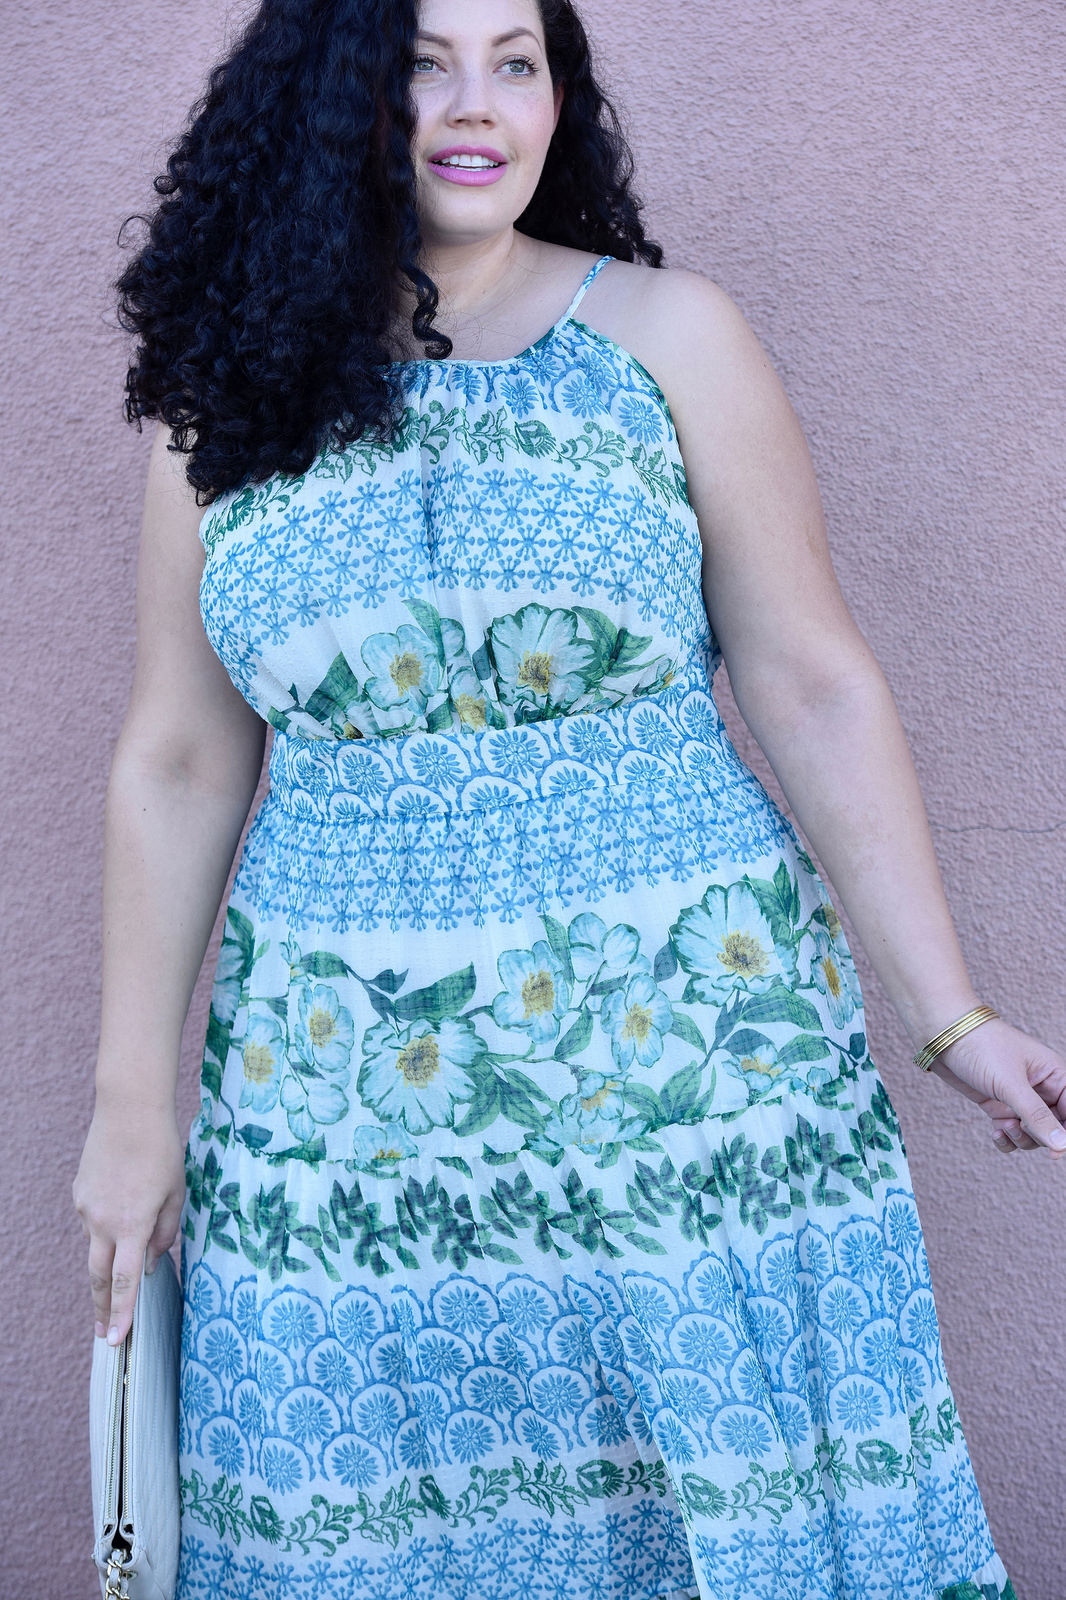 Plus size Maxi Dress by Eliza J, Bag from BCBG, and Love Lorn Lipstick by Mac via @girlwithcurves